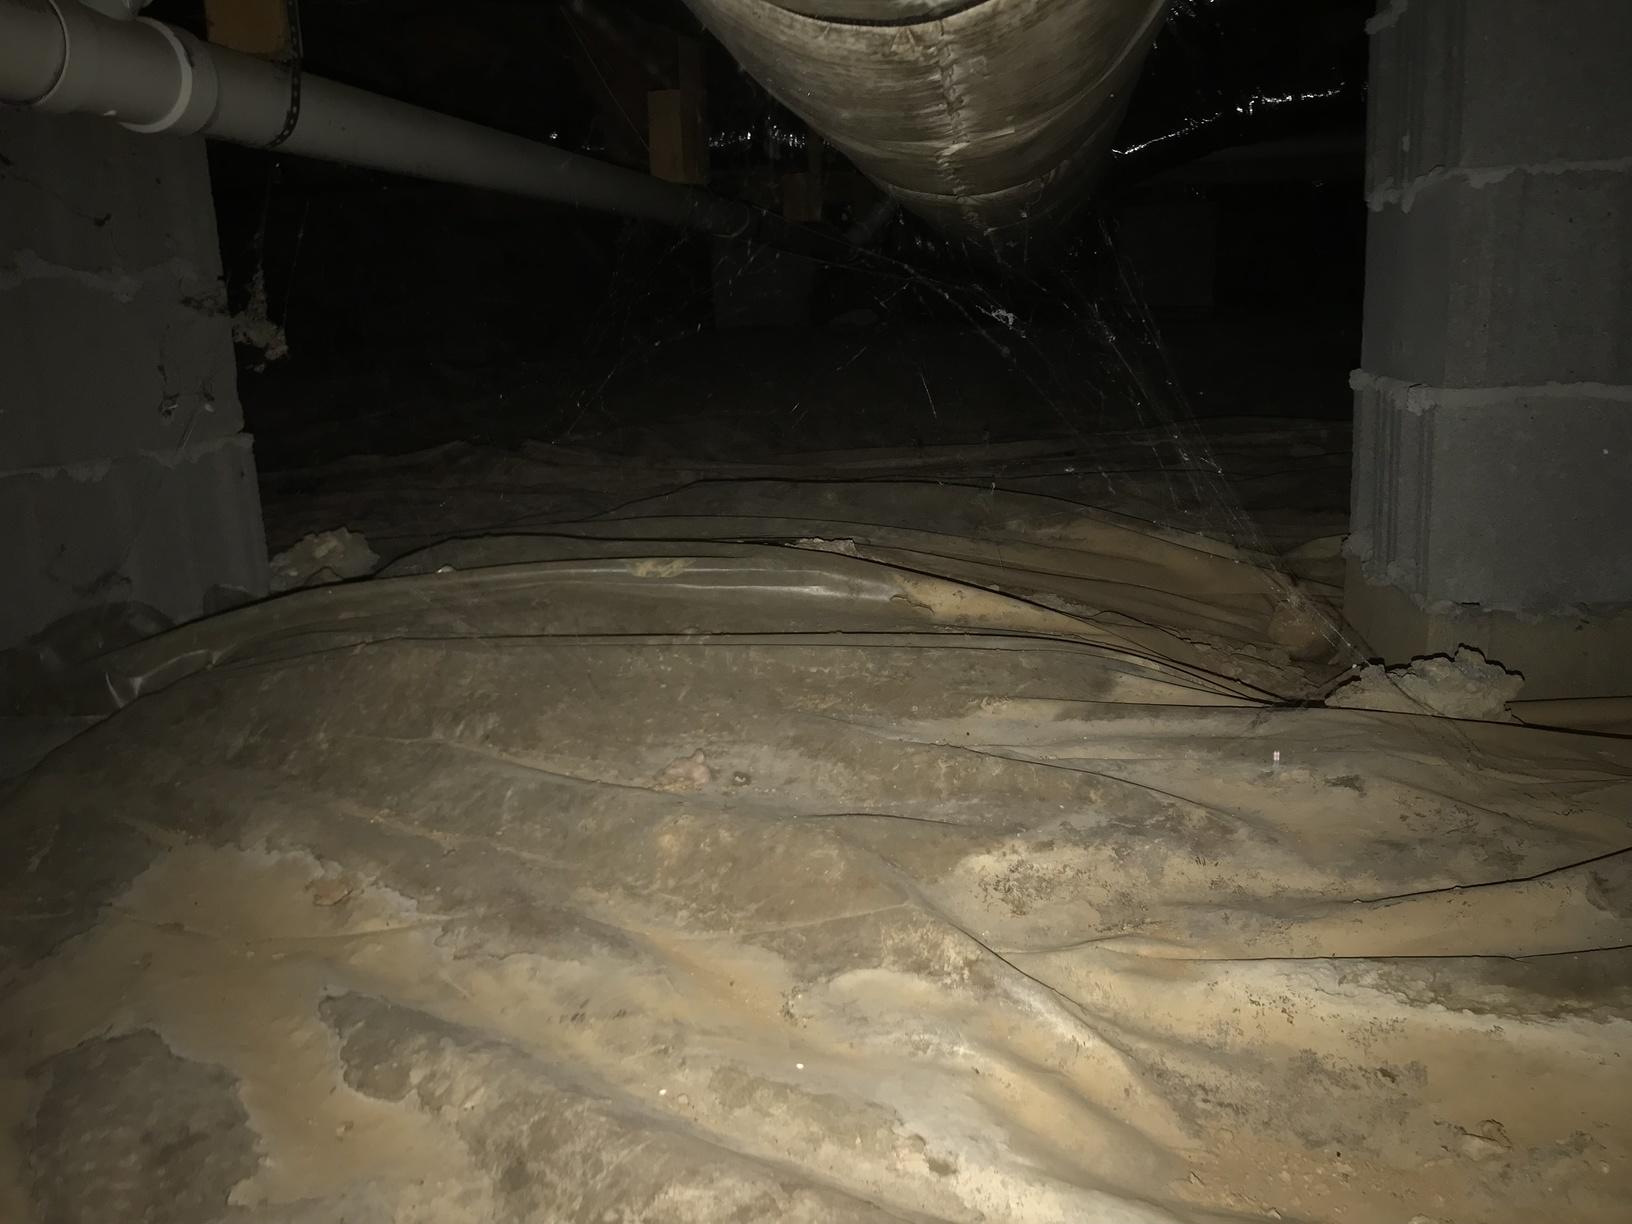 A dirty crawl space can make for an unhealthy home. Mold and wood rot occur.